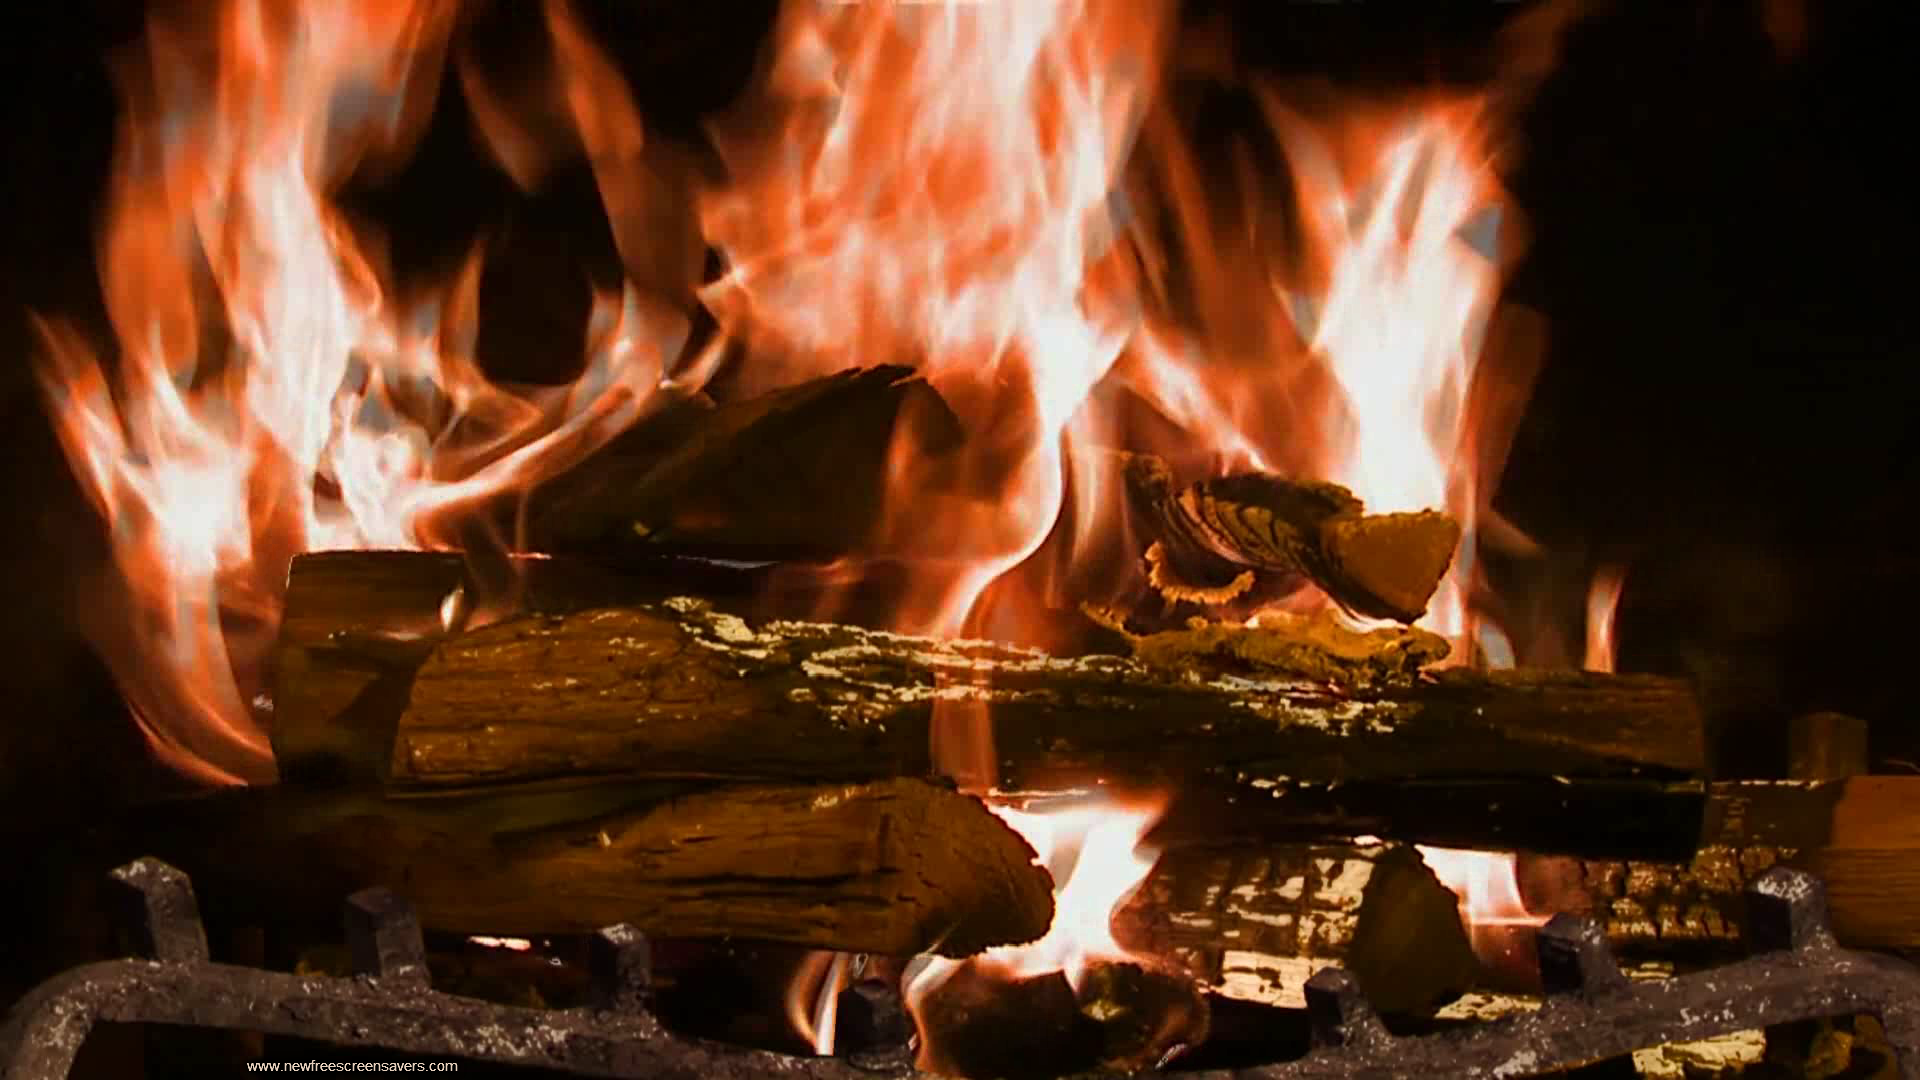 3d christmas fireplace screensaver free download